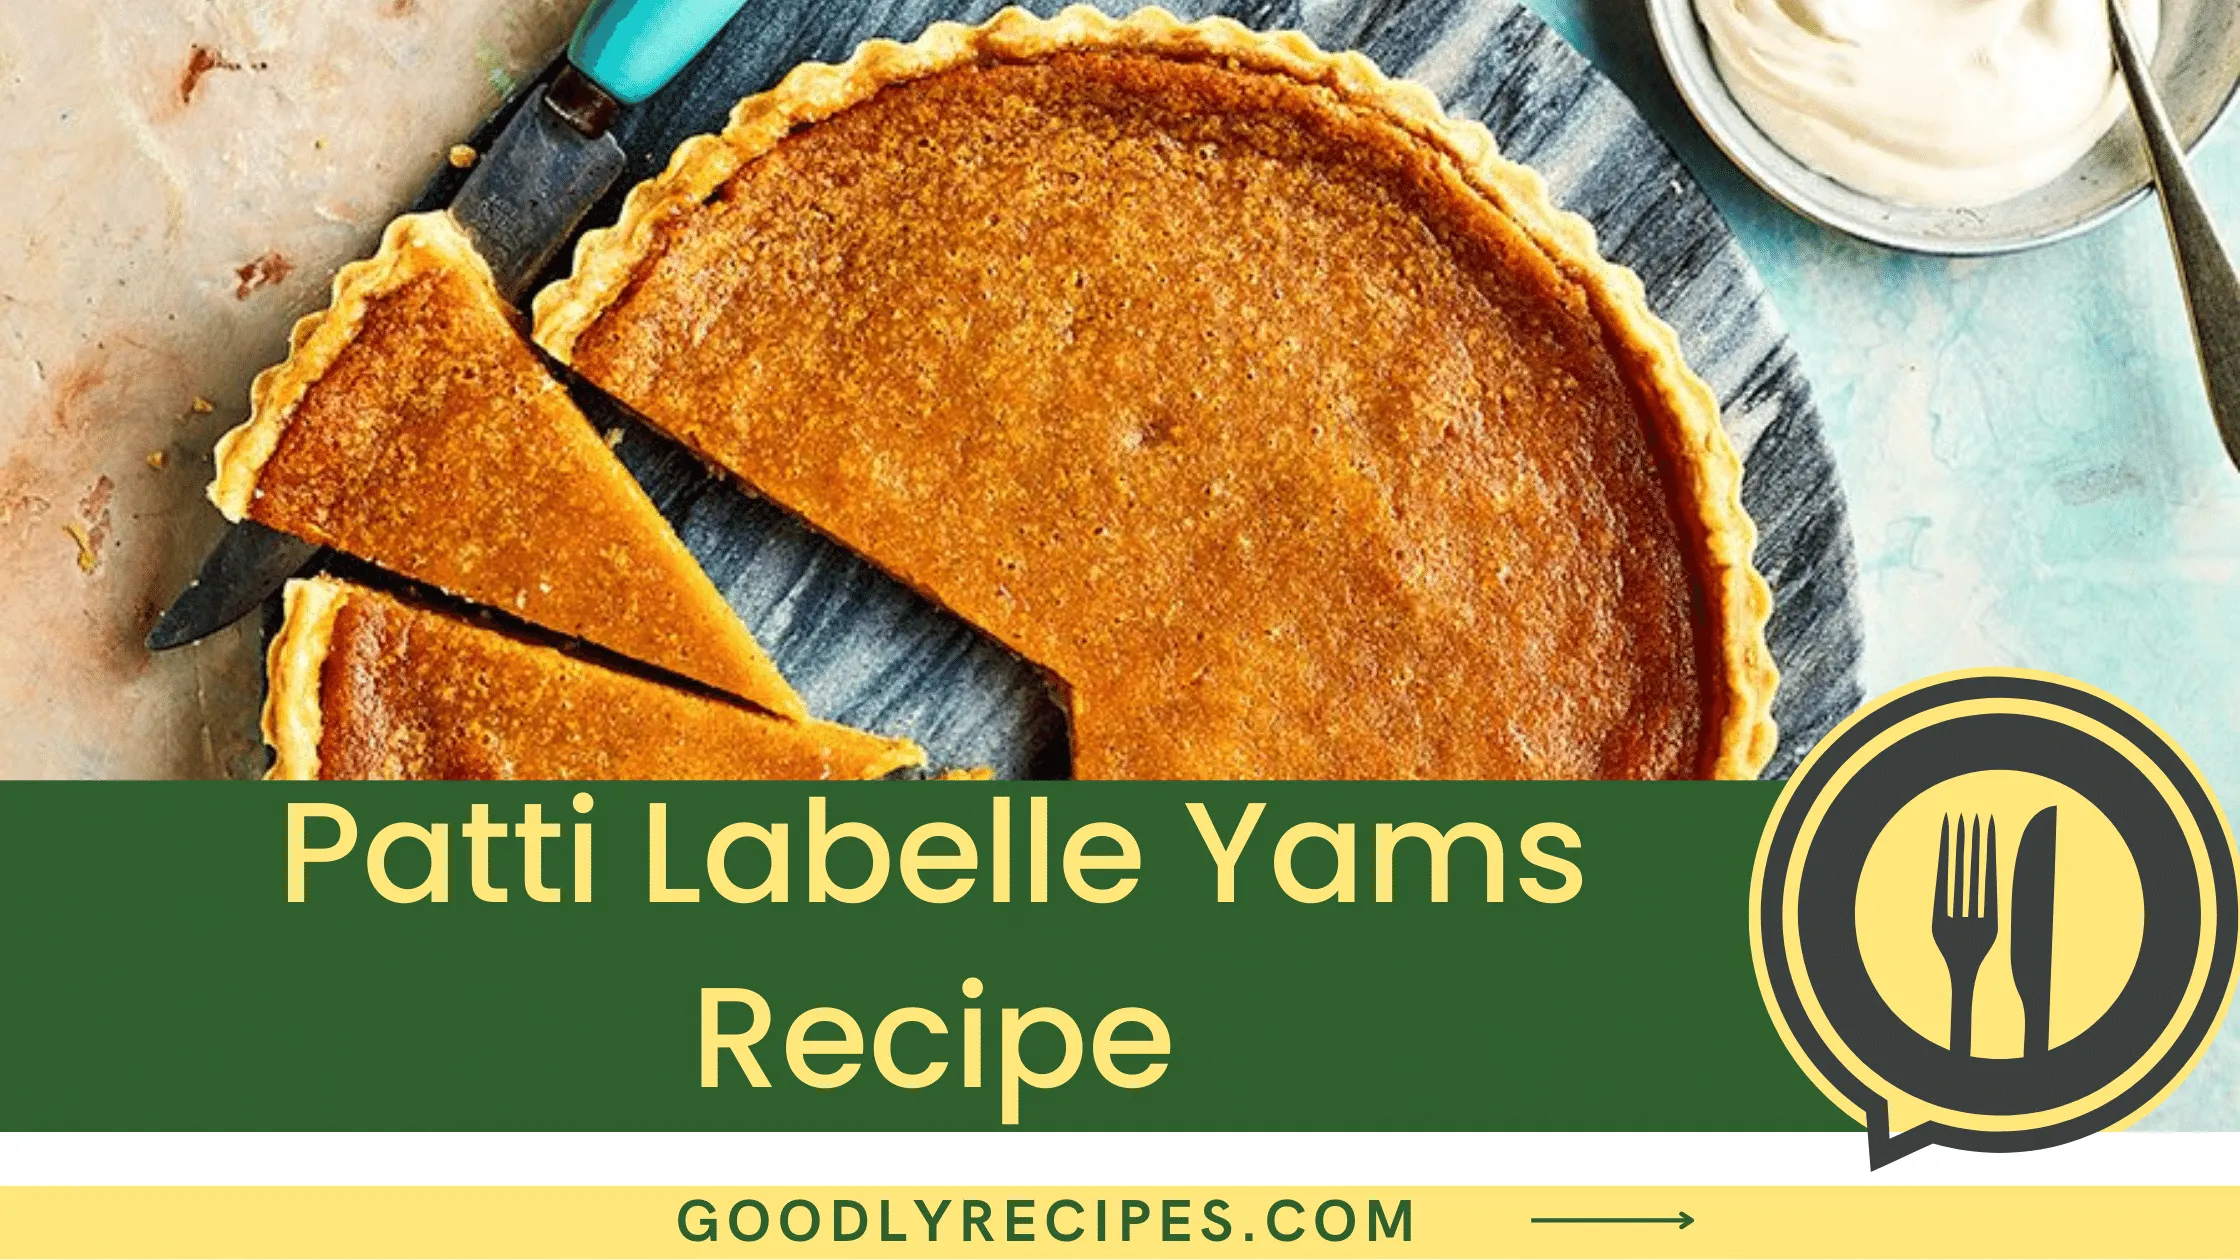 Patti Labelle Yams Recipe - For Food Lovers